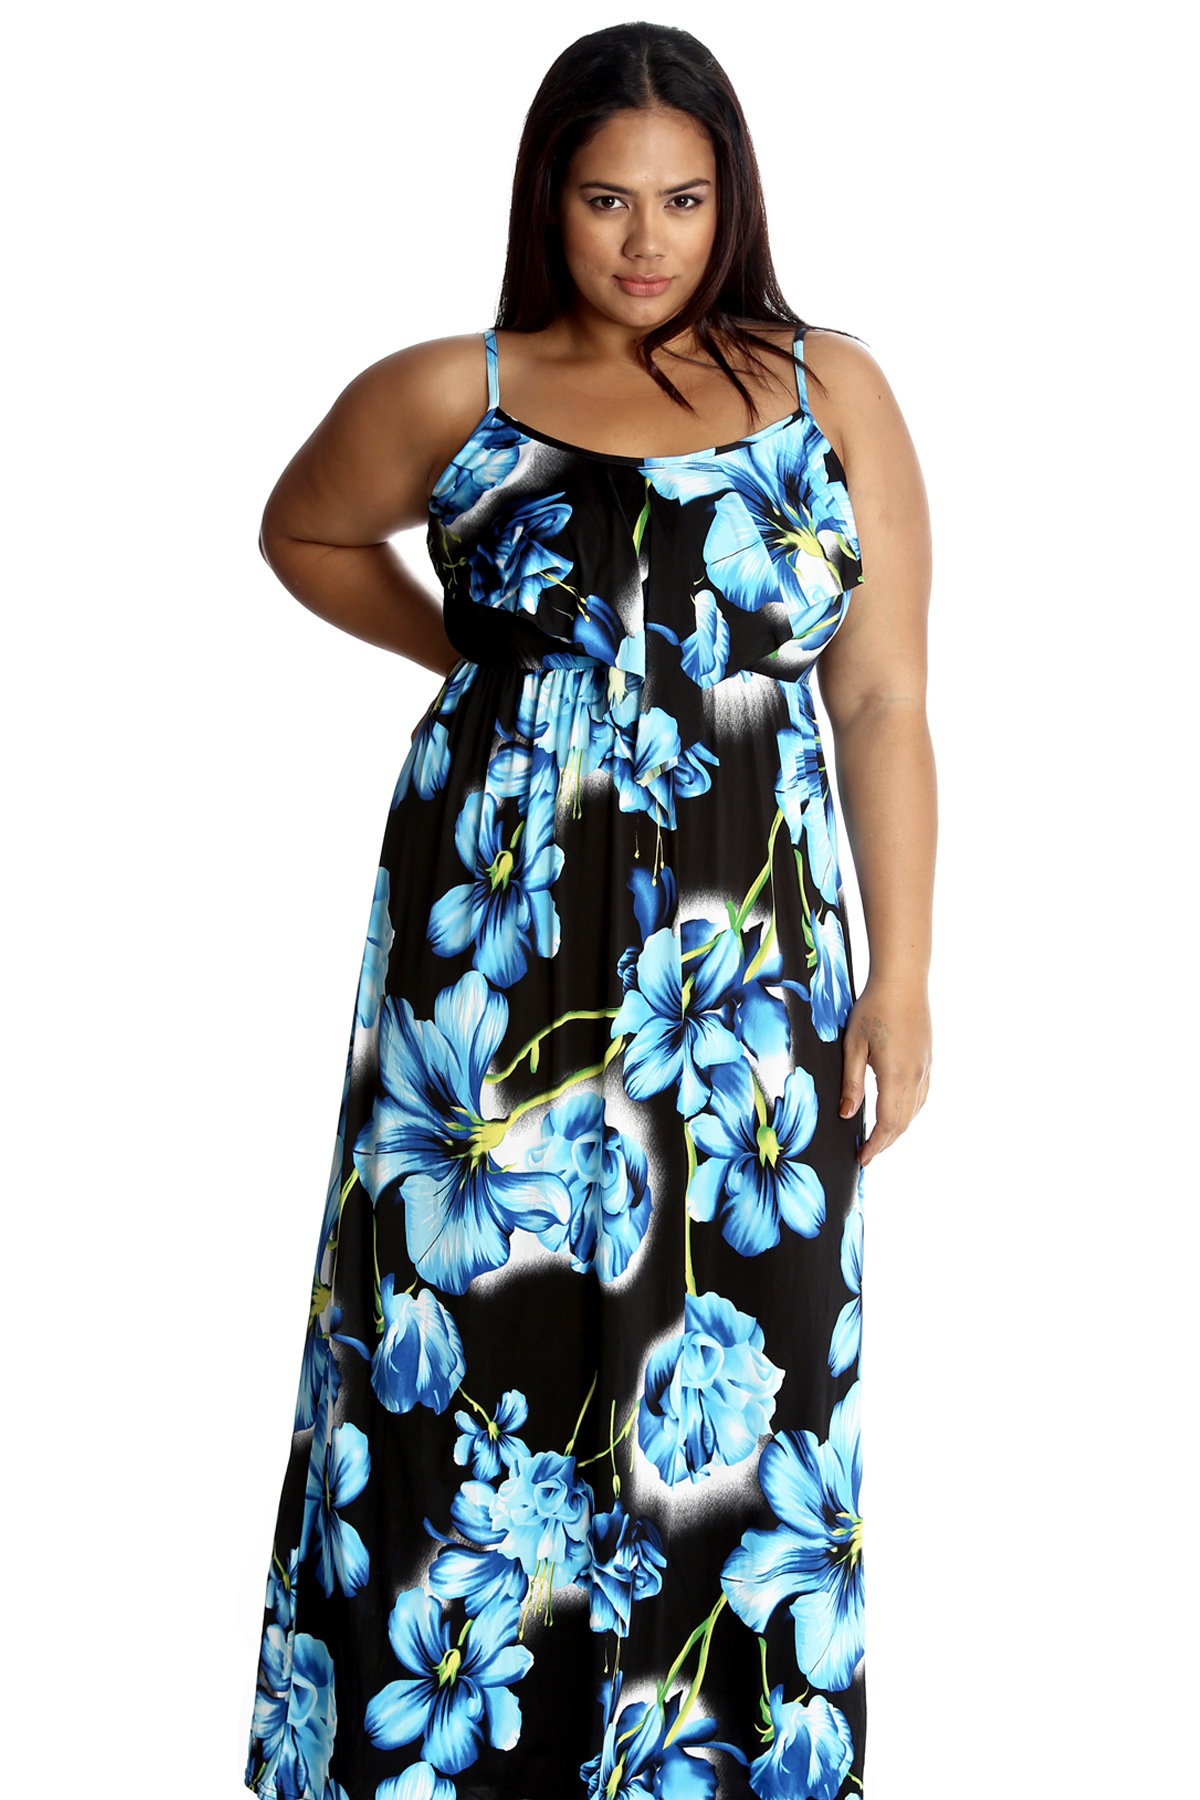 New Ladies Plus Size Maxi Dress Womens Tank Top Style Sleeveless Floral ...